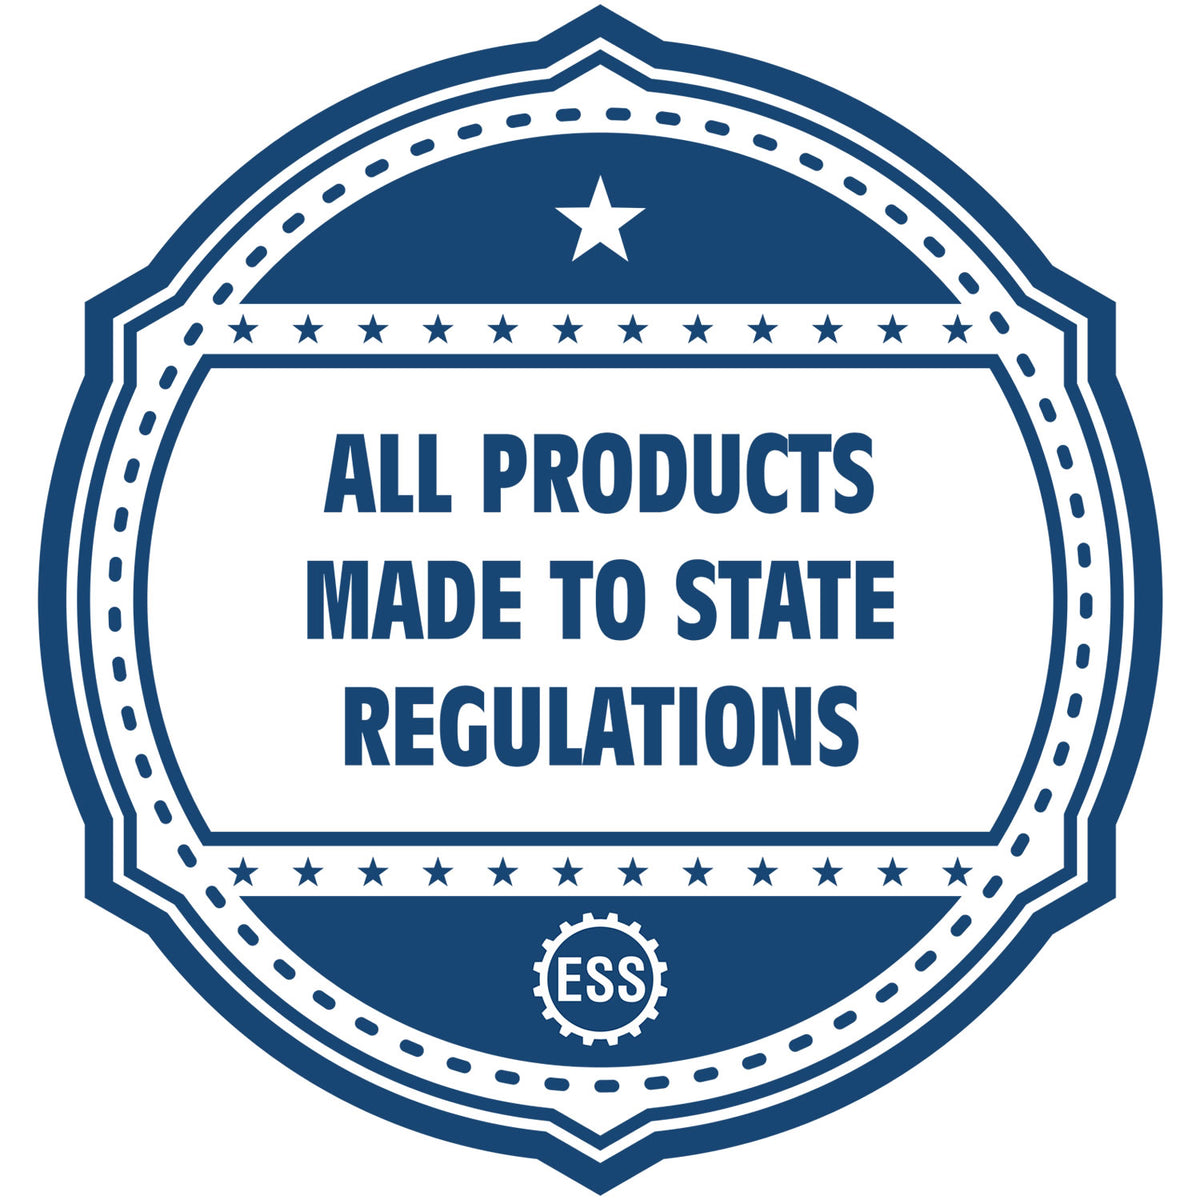 A blue icon or badge for the Self-Inking Minnesota Geologist Stamp showing that this product is made in compliance with state regulations.